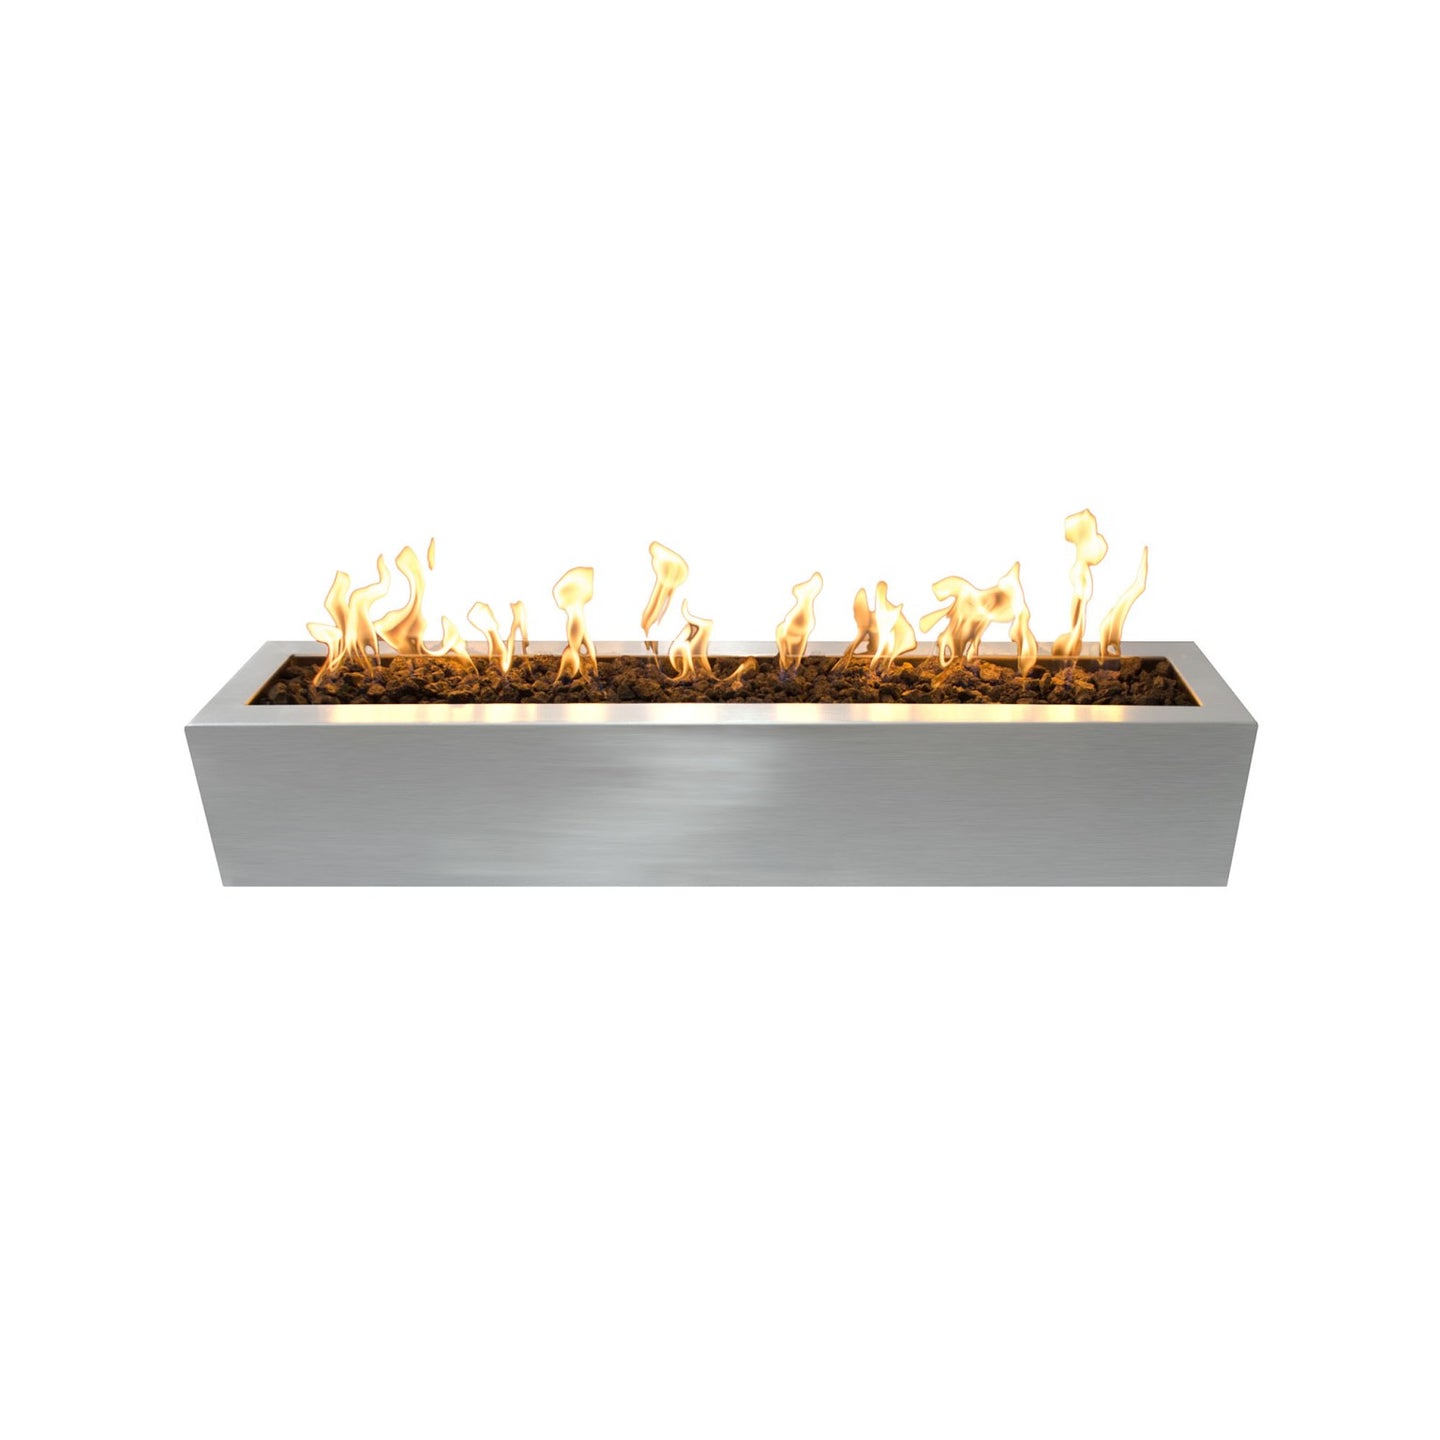 Eaves Stainless Steel Fire Pit